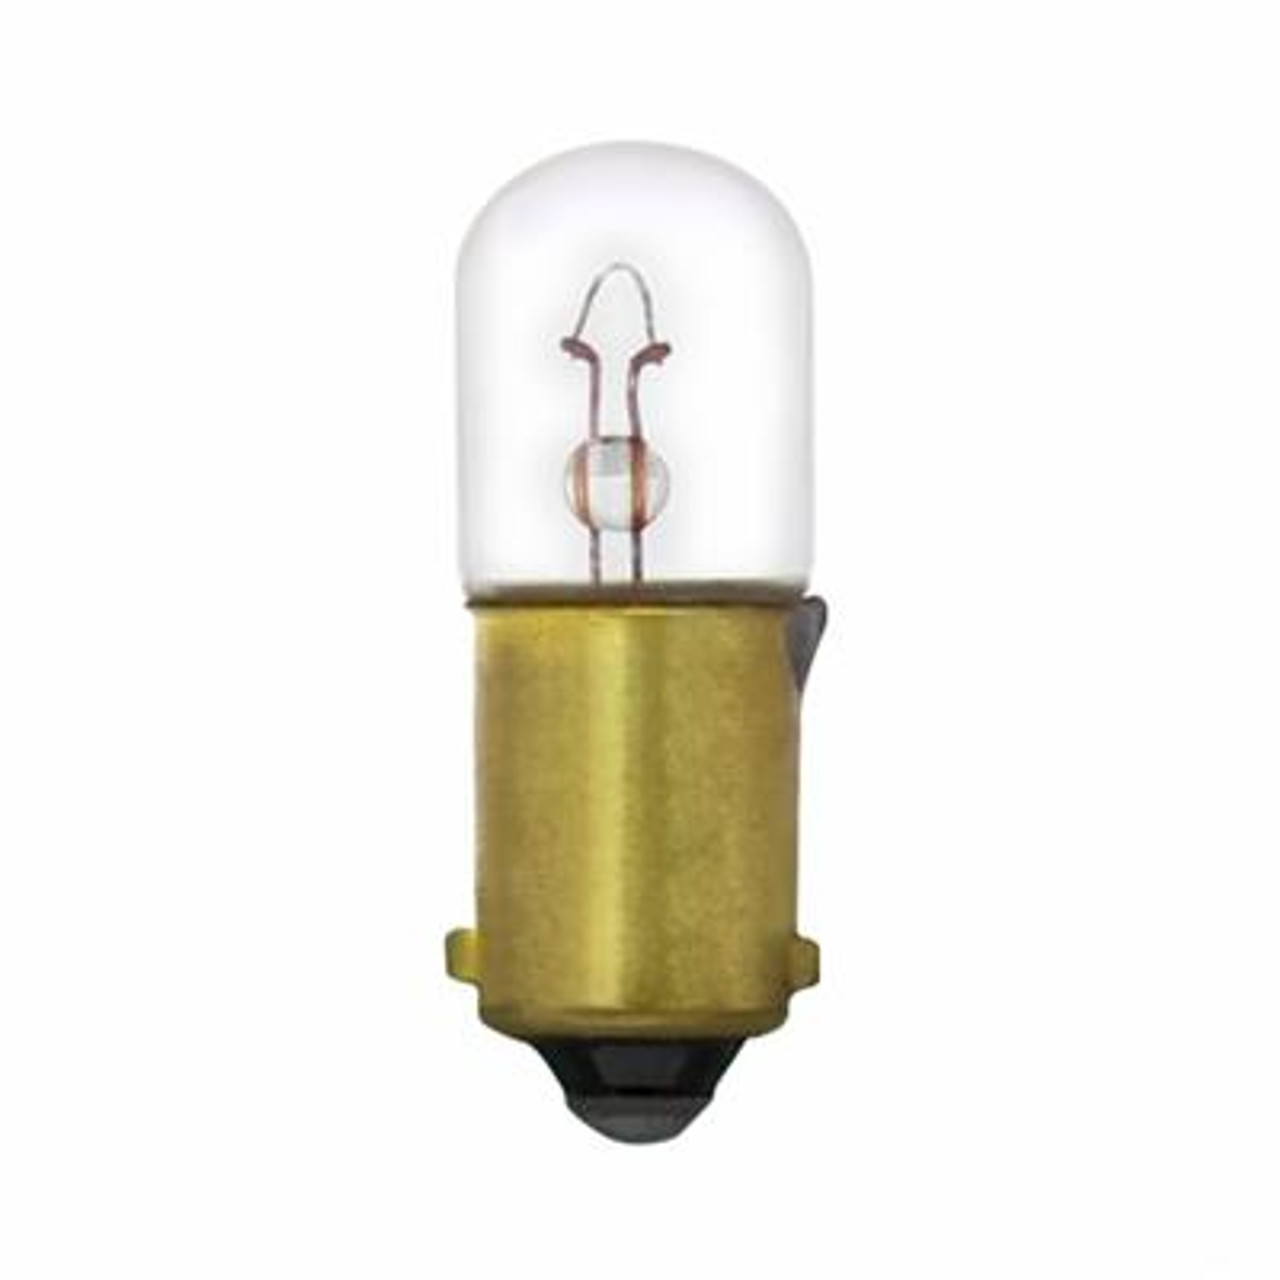 We offer a wide range of light bulbs from incandescent turn signal bulbs, LED headlight bulbs, LED dome nights, to halogen headlight bulbs. And if you wanted to add some flavor, we also sell light bulb covers in a variety of colors!